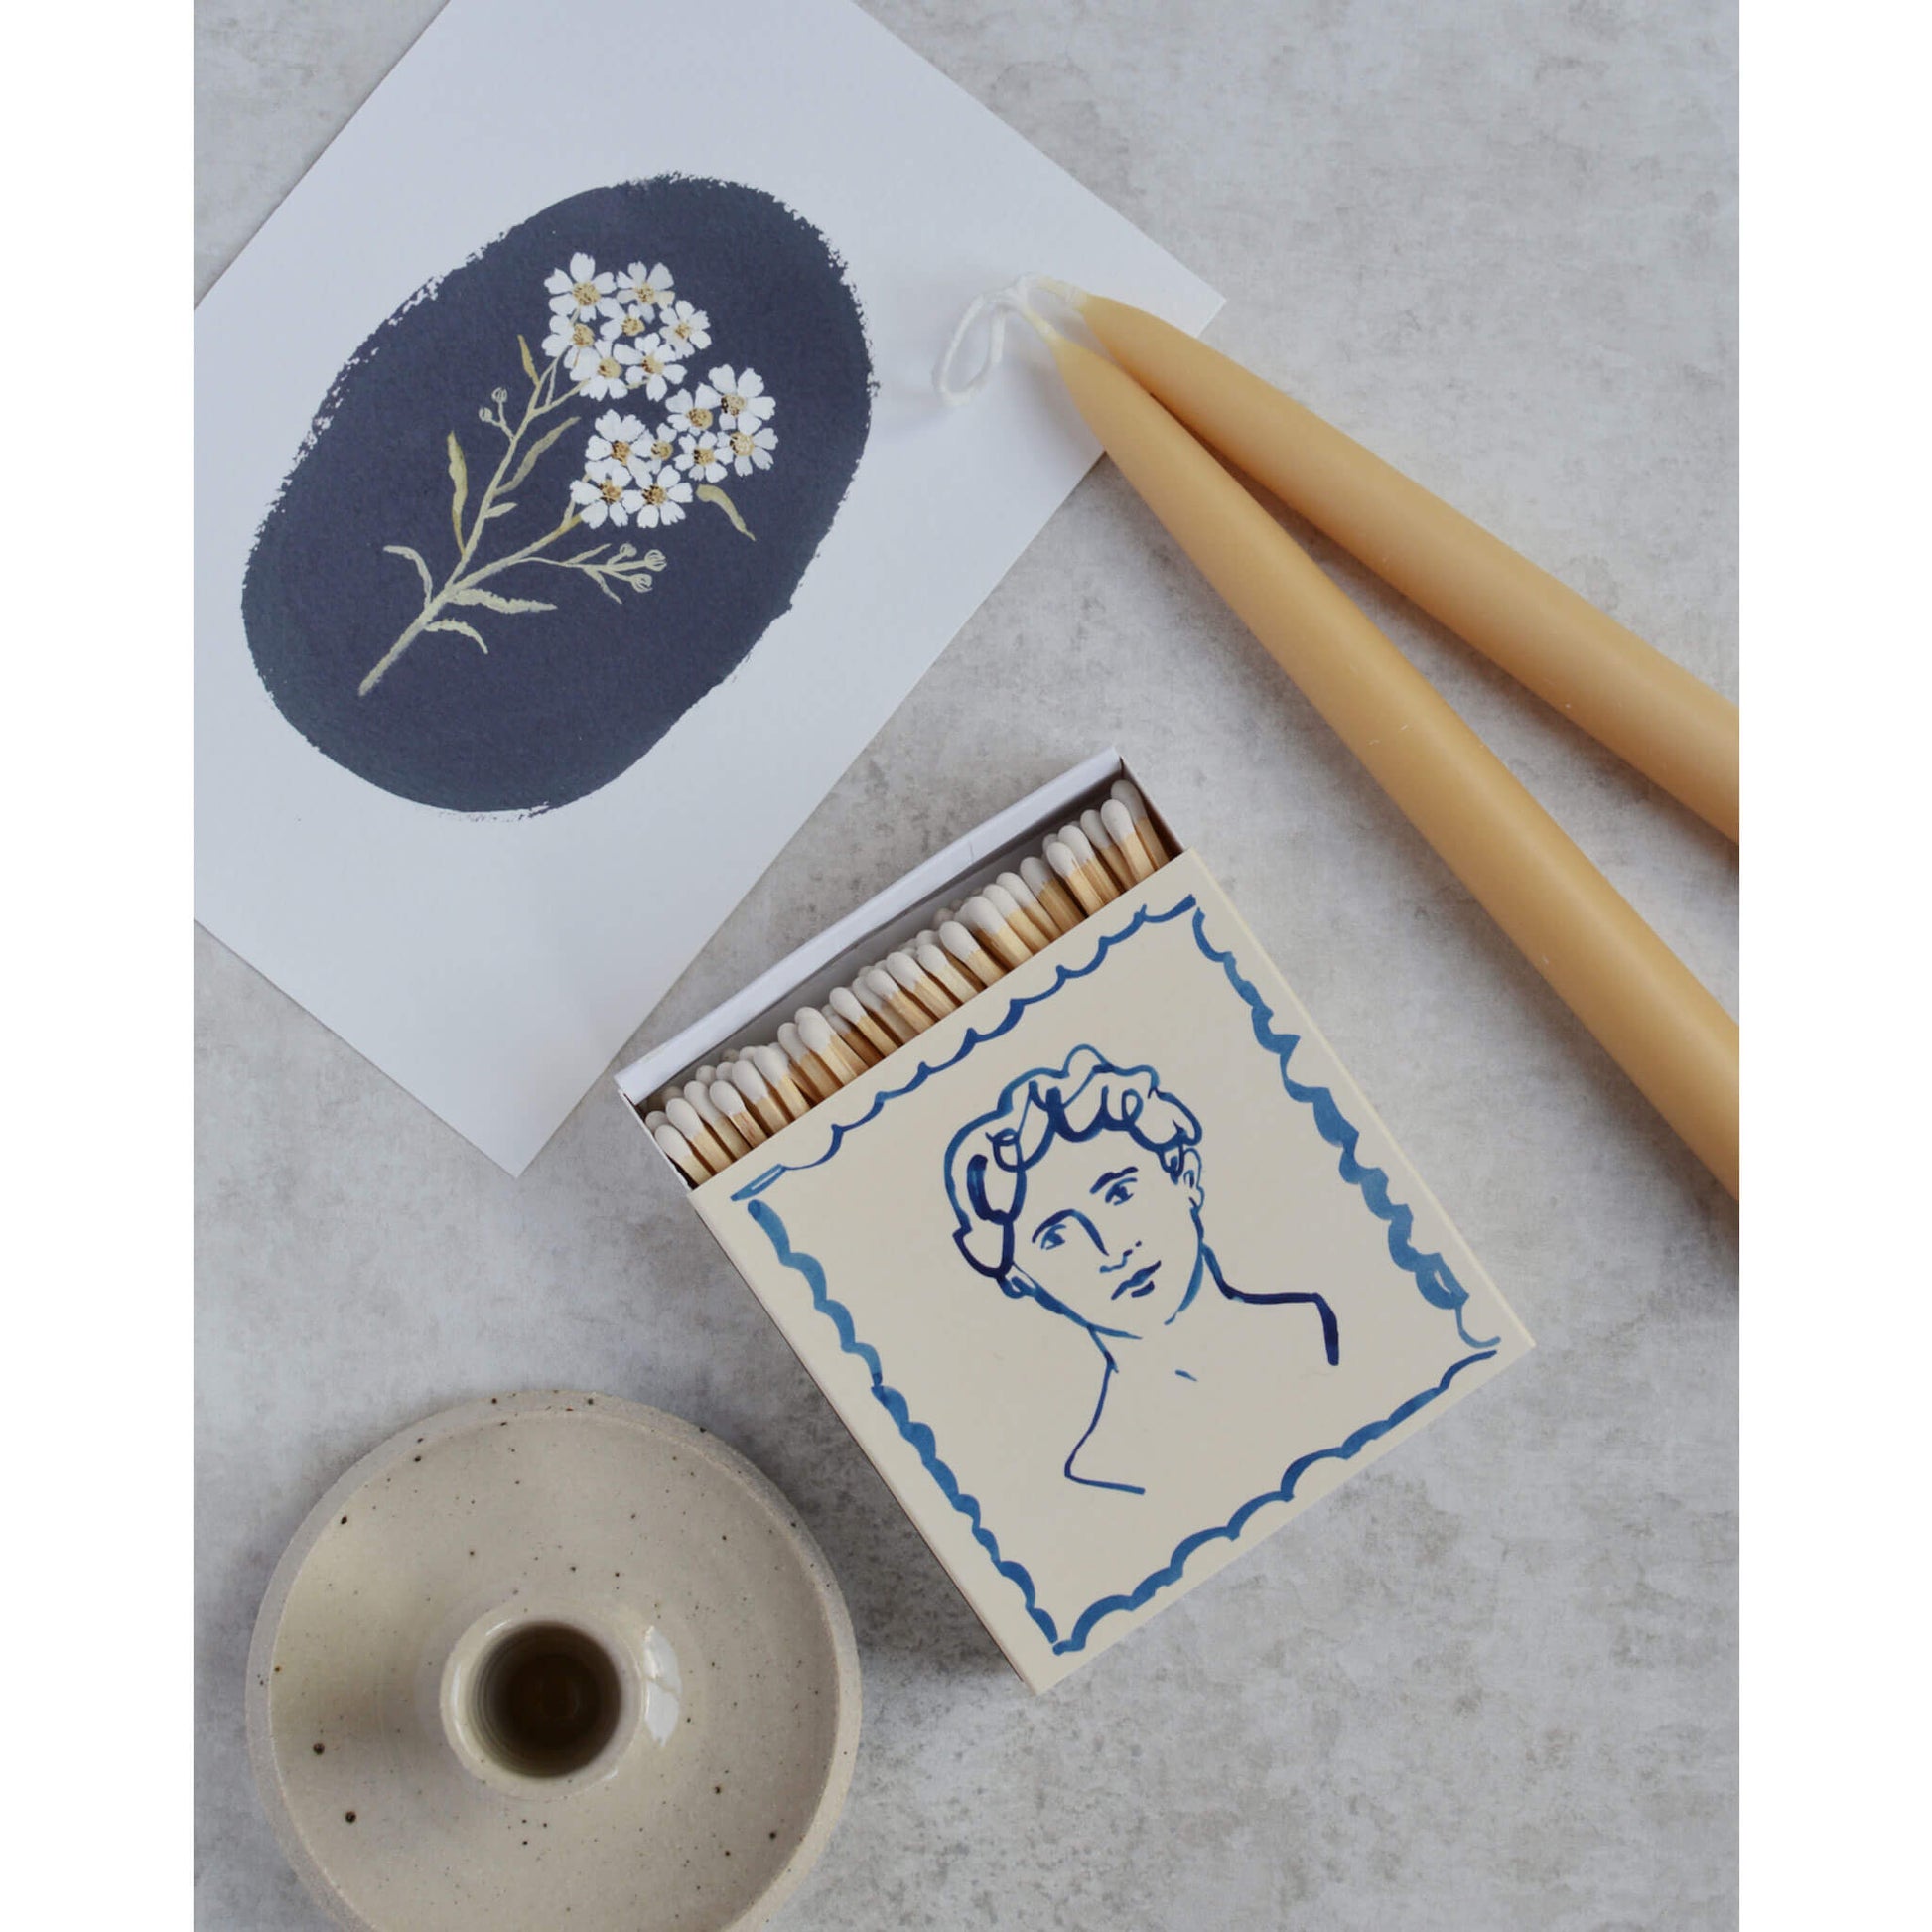 Illustrated square match box, next to a botanical illustration and beeswax candles.